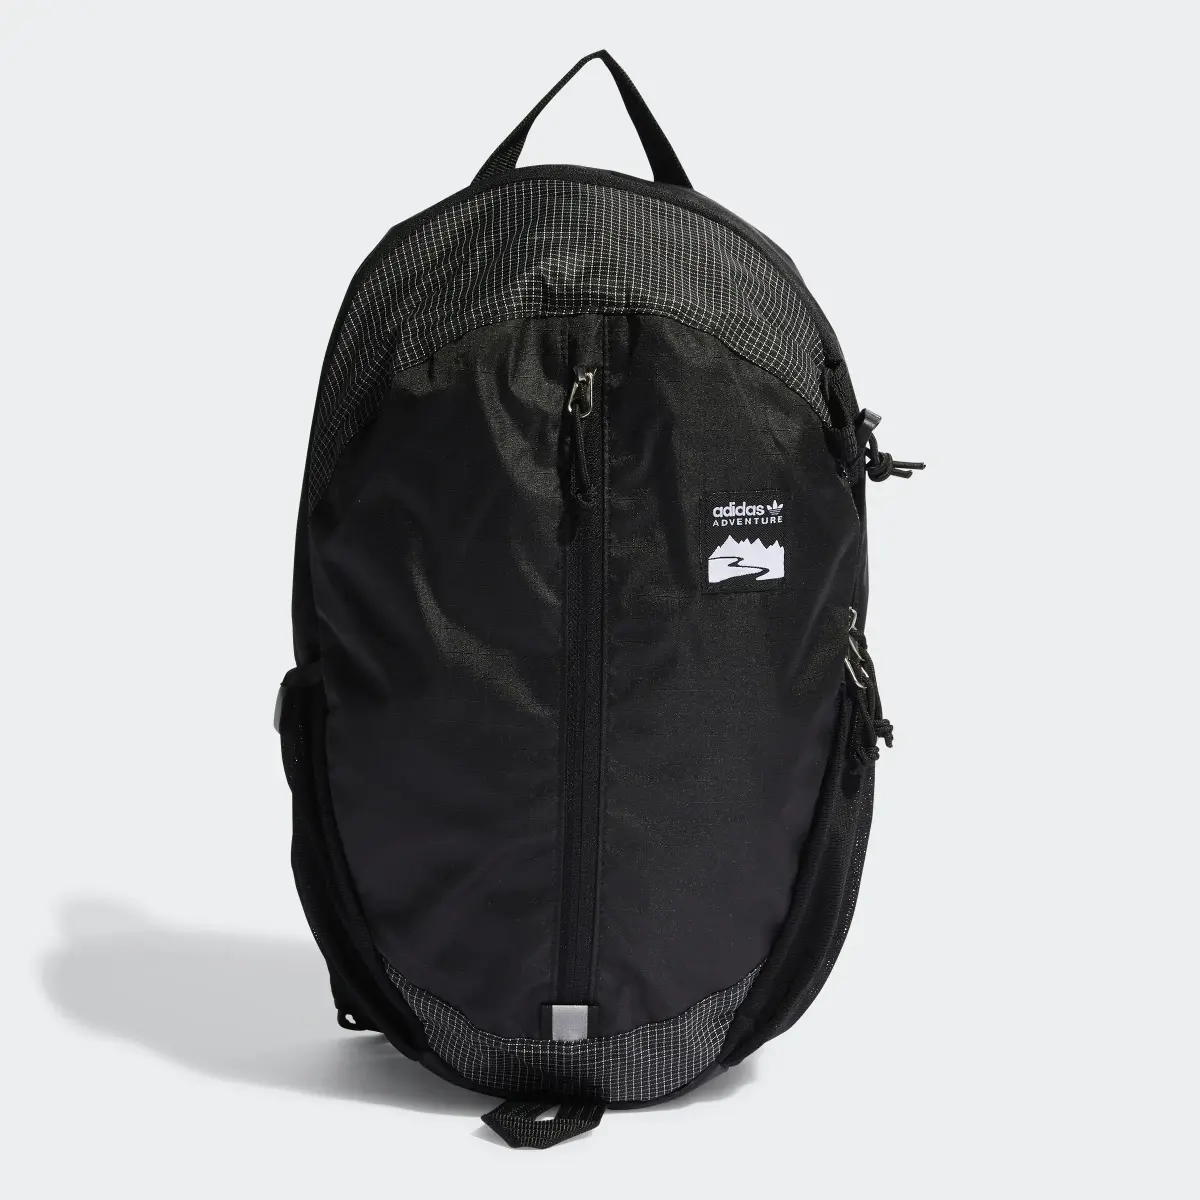 Adidas Adventure Backpack Small. 1